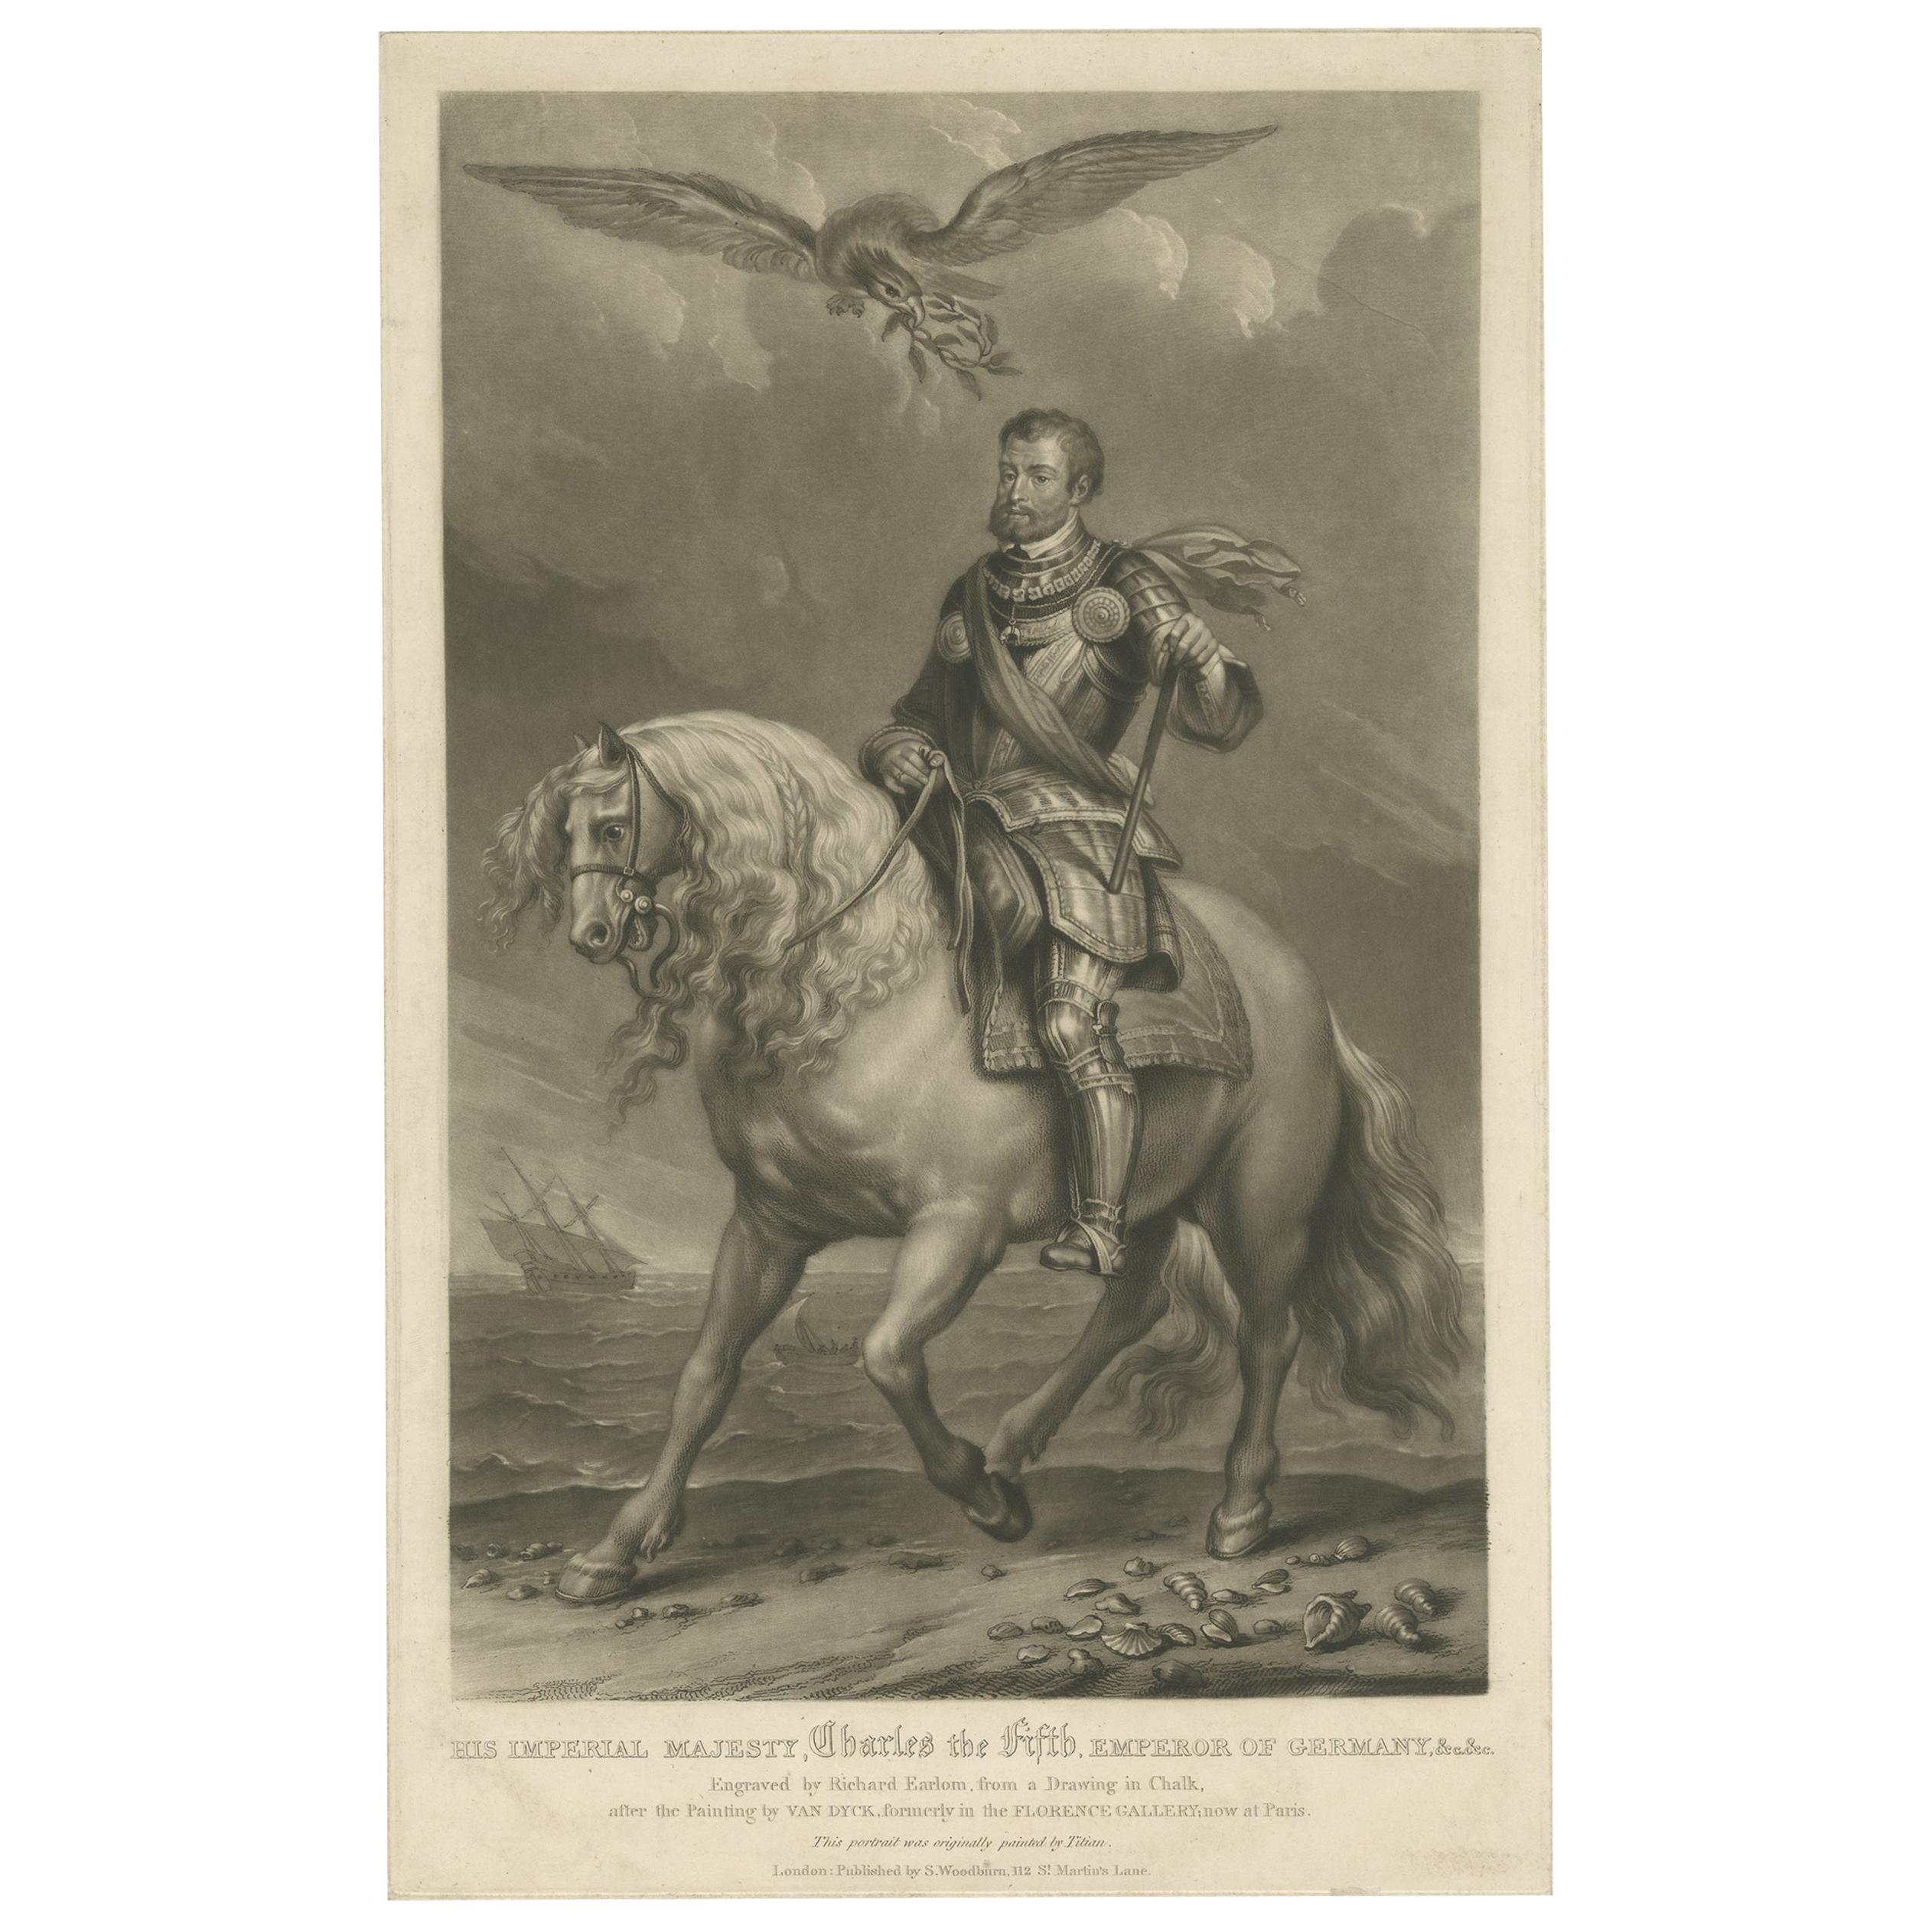 Antique Print of Charles v by Woodburn, 1816